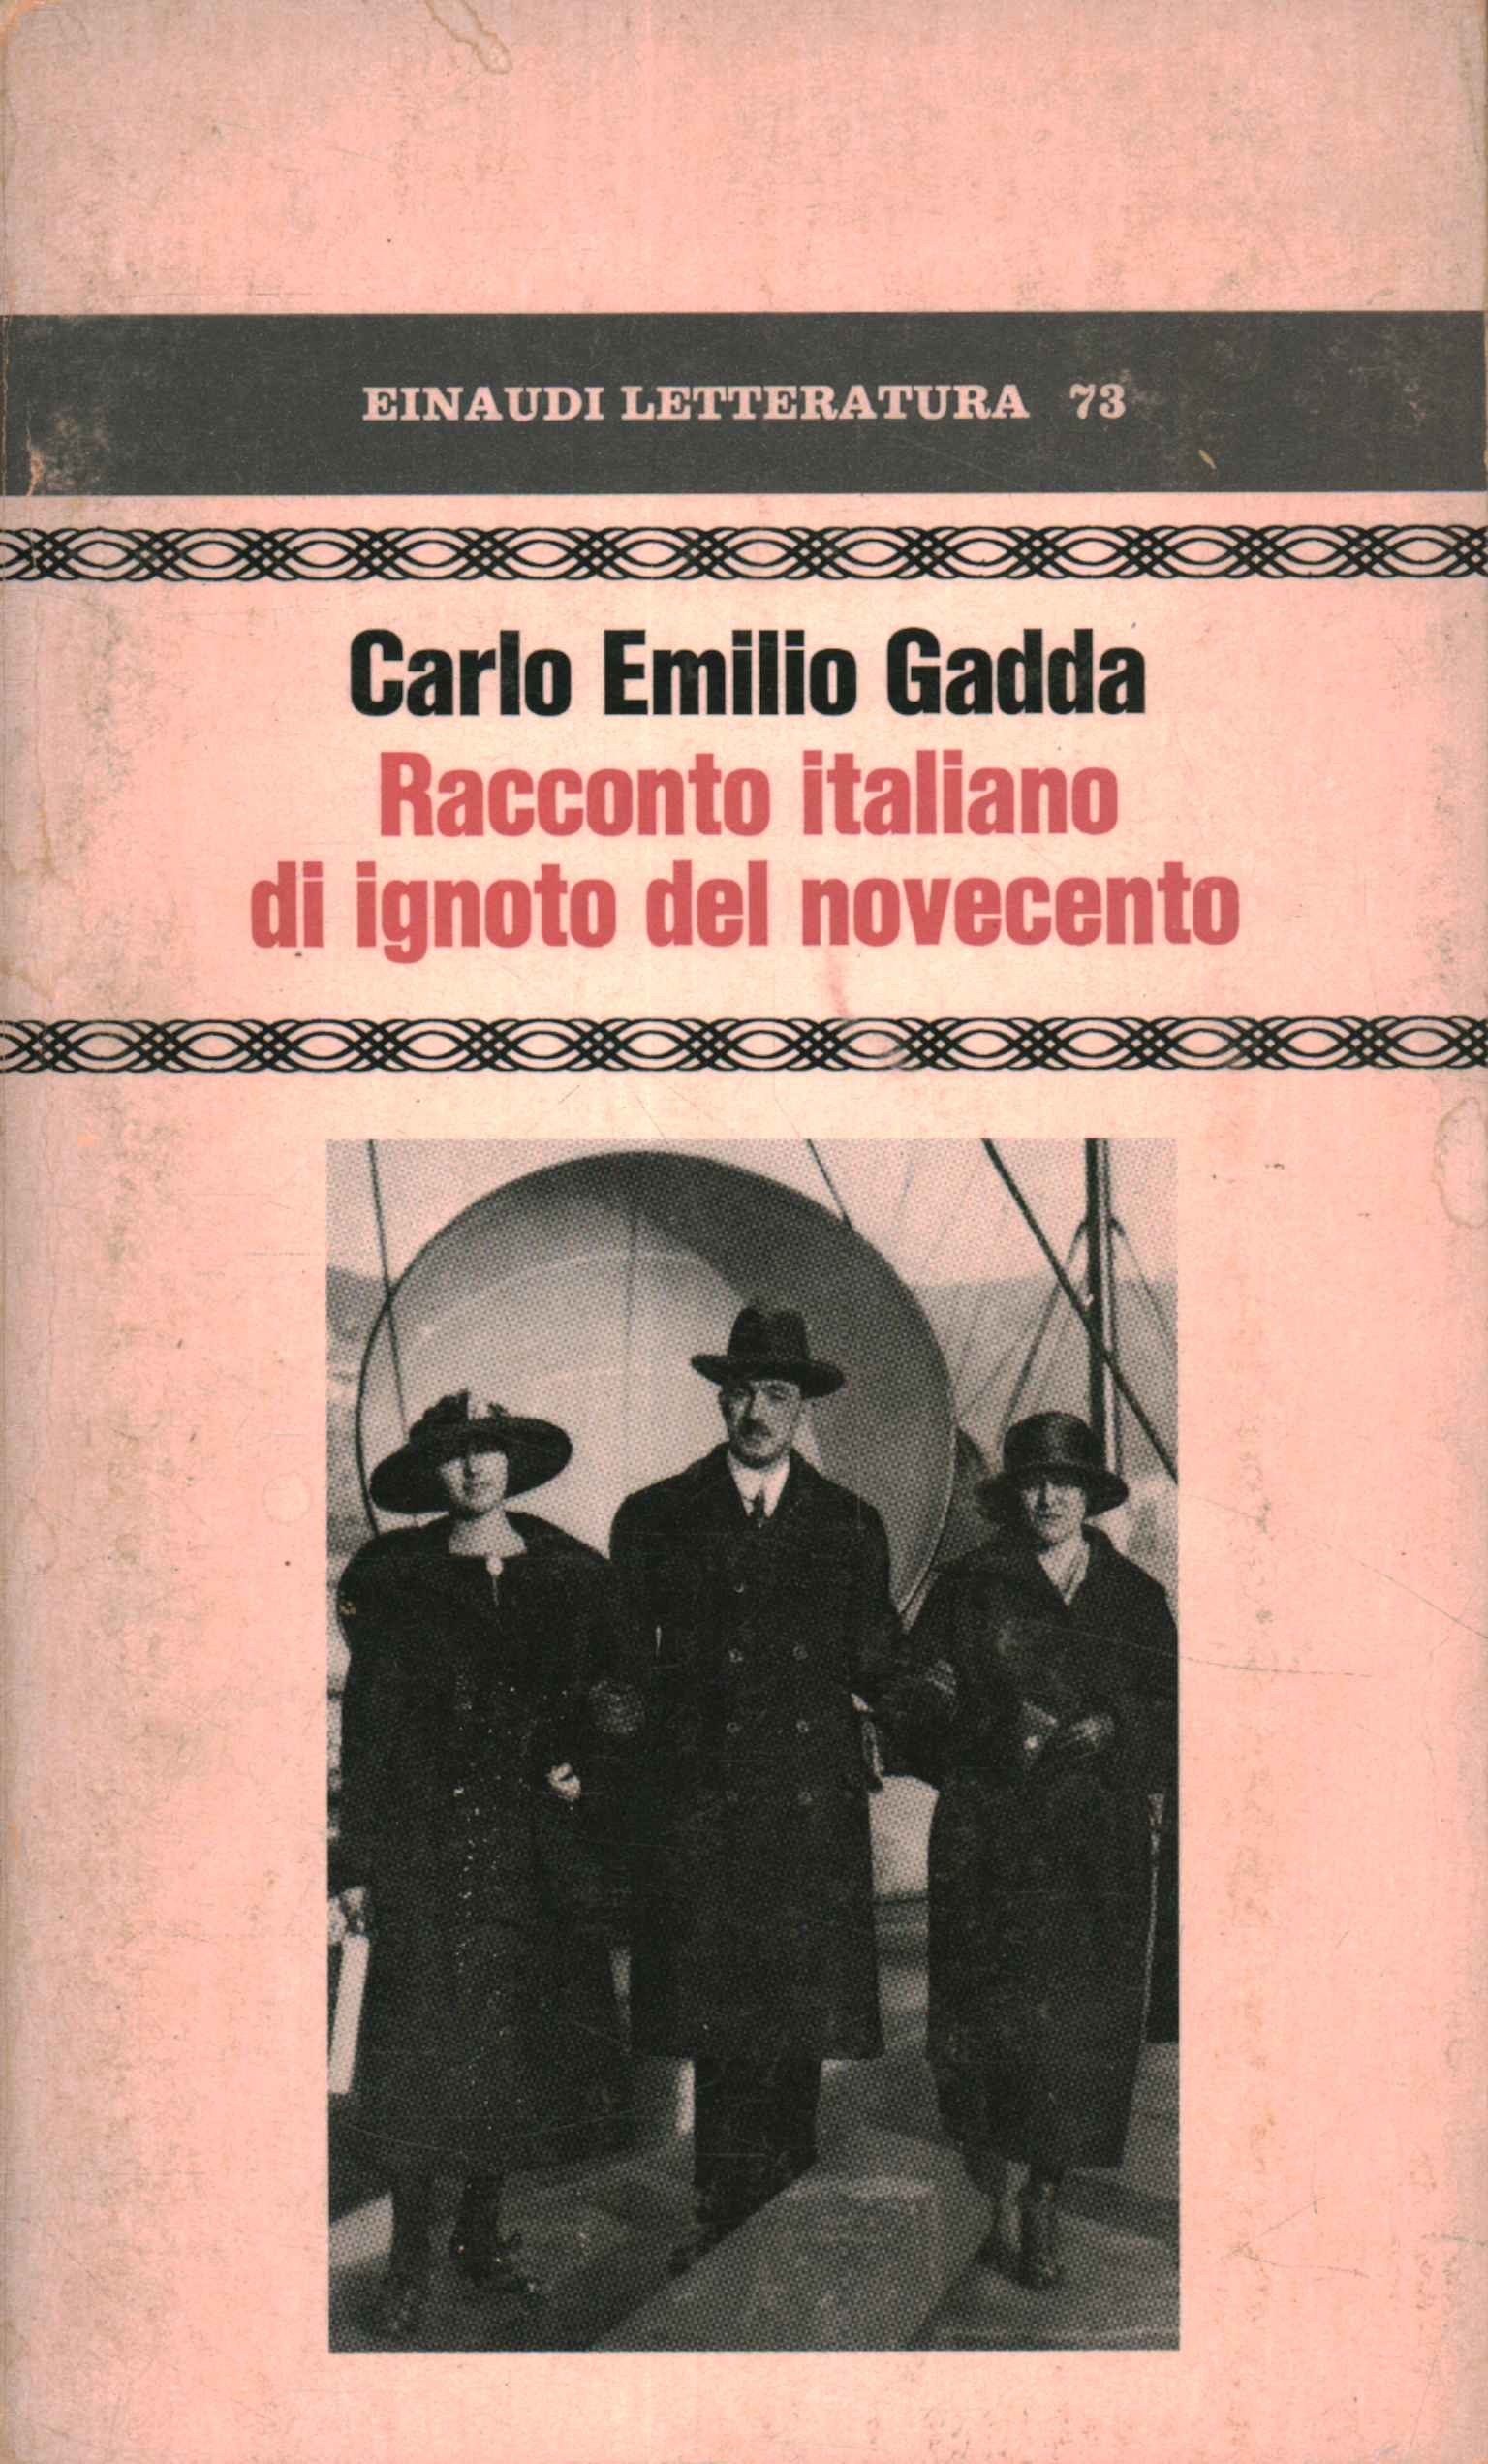 Italian tale of an unknown person from the twentieth century